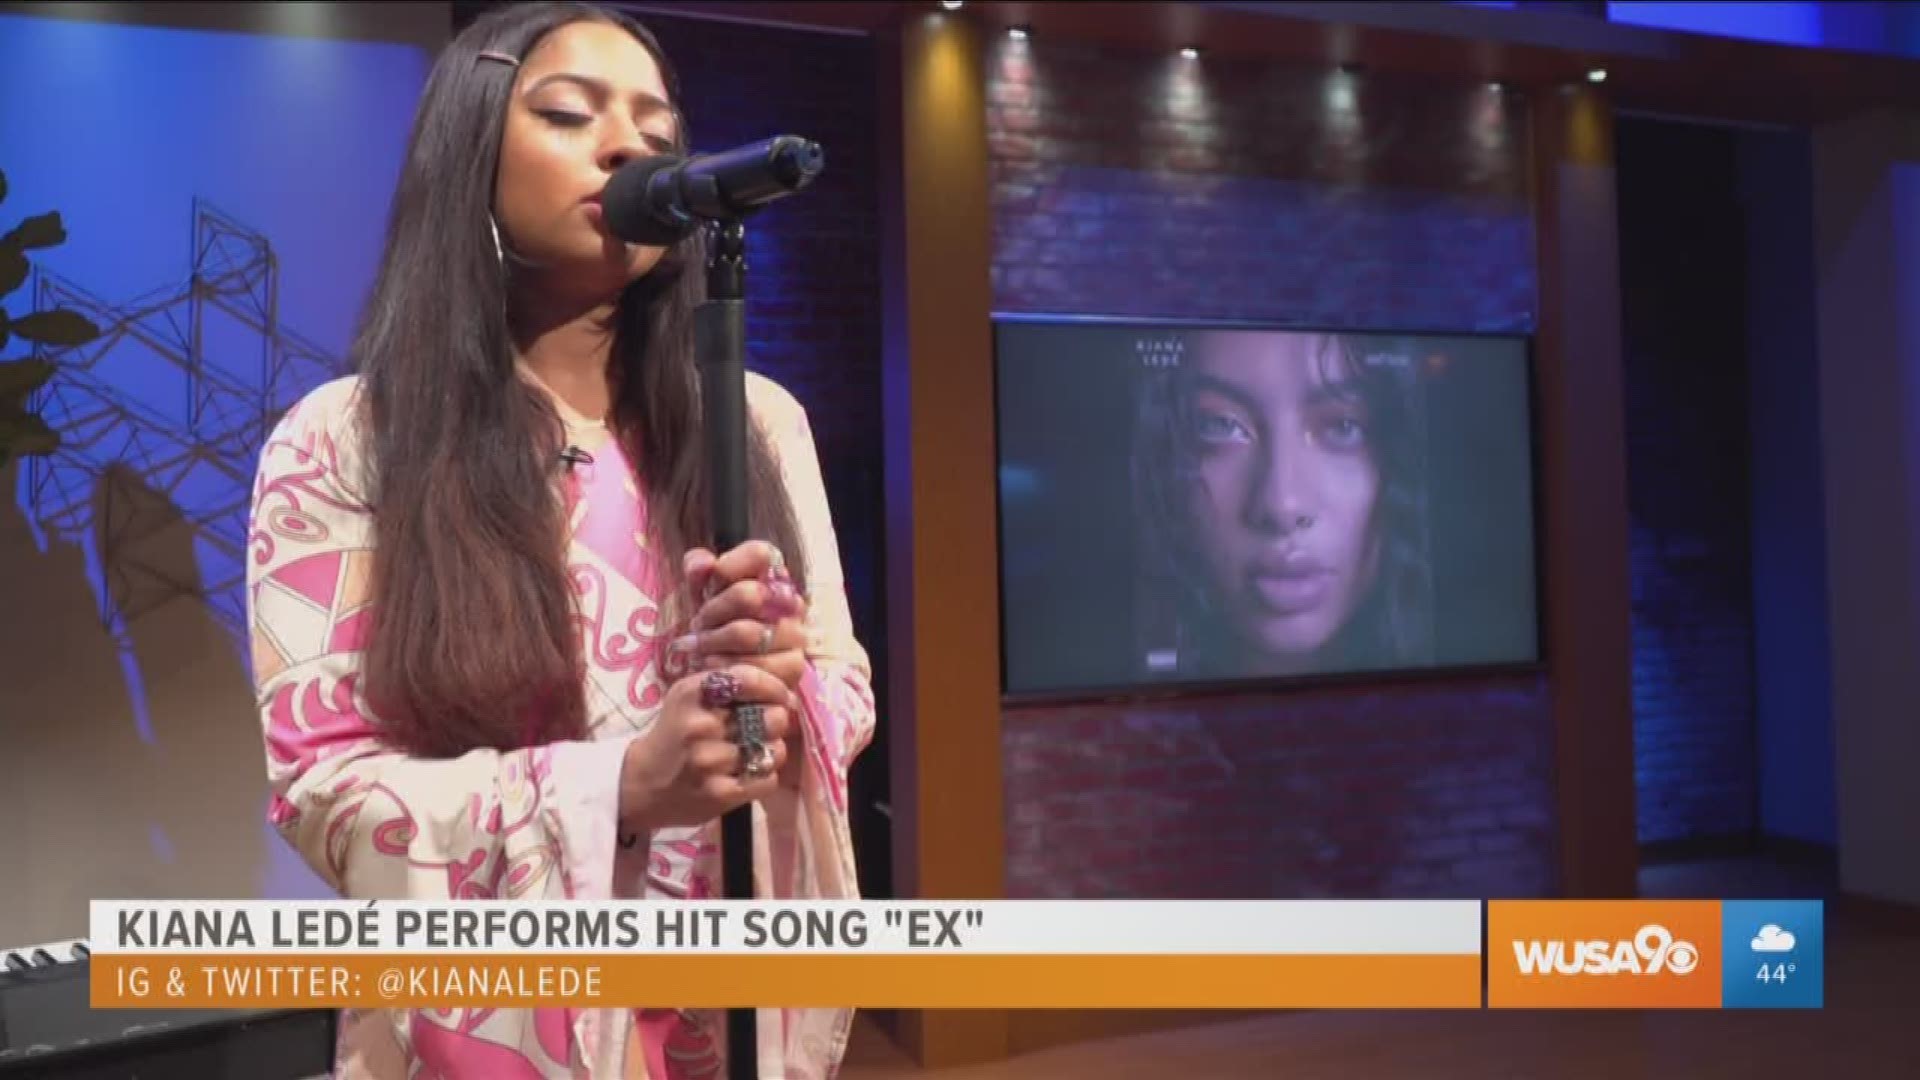 Republic records artist Kiana Lede stopped by Great Day Washington, during her tour with Grammy award winning artist Ella Mai, to perform her hit song "Ex".